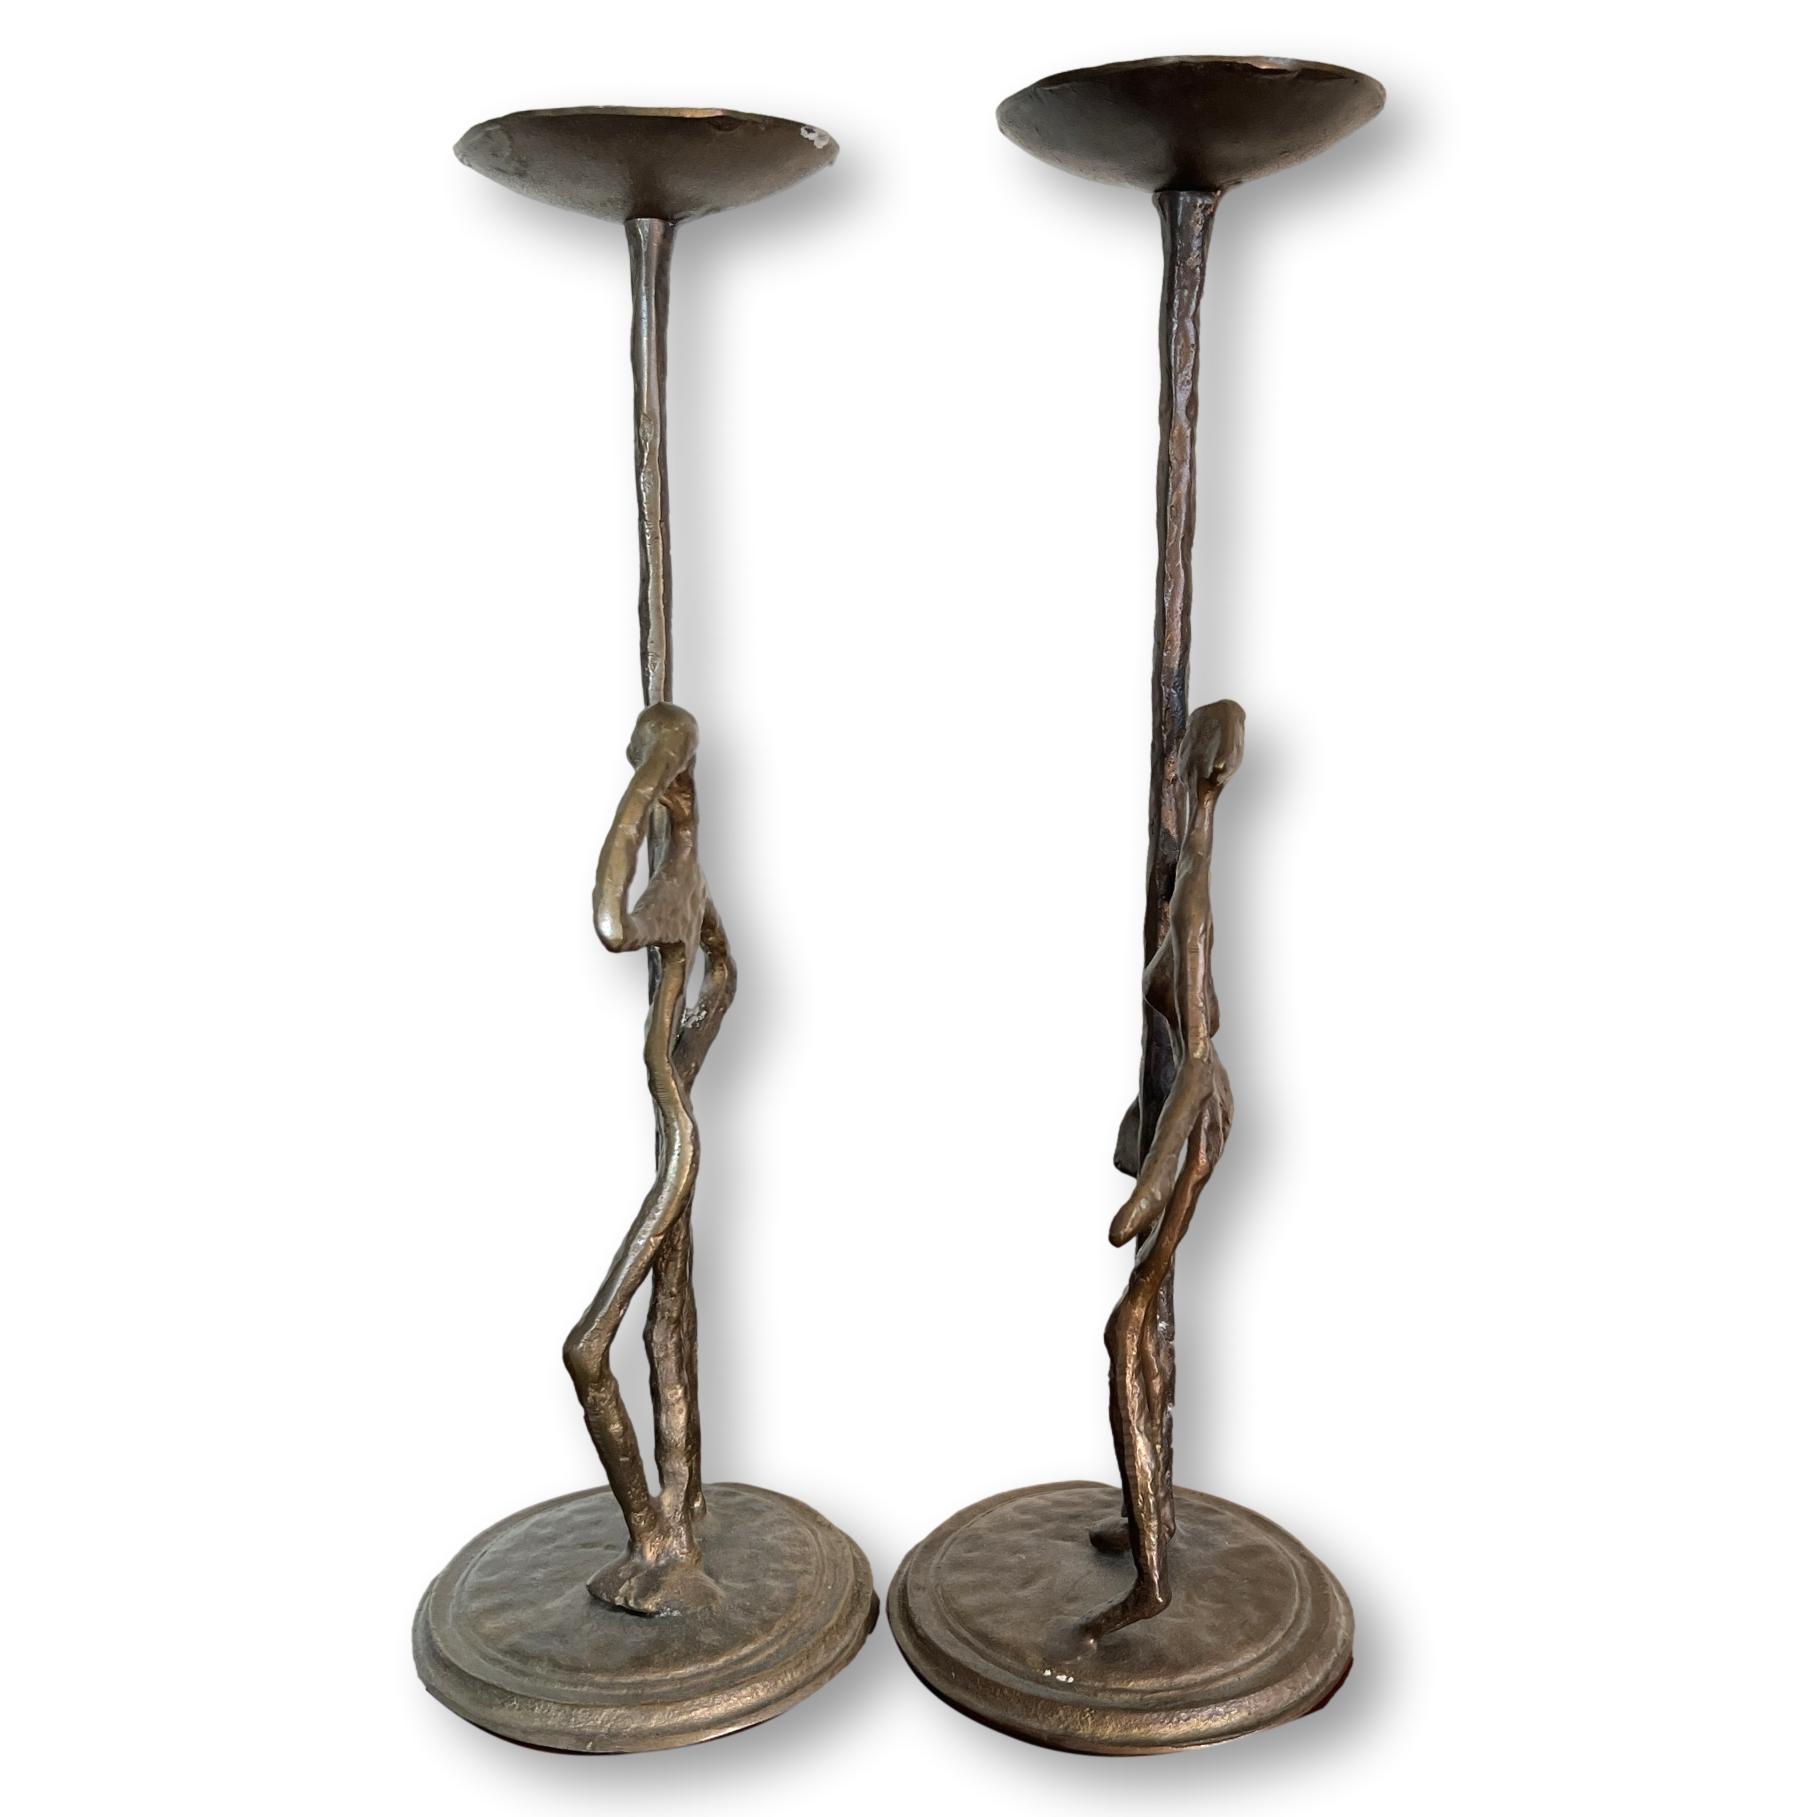 Pair of Brutalist Metal Candle Holders After Giacometti